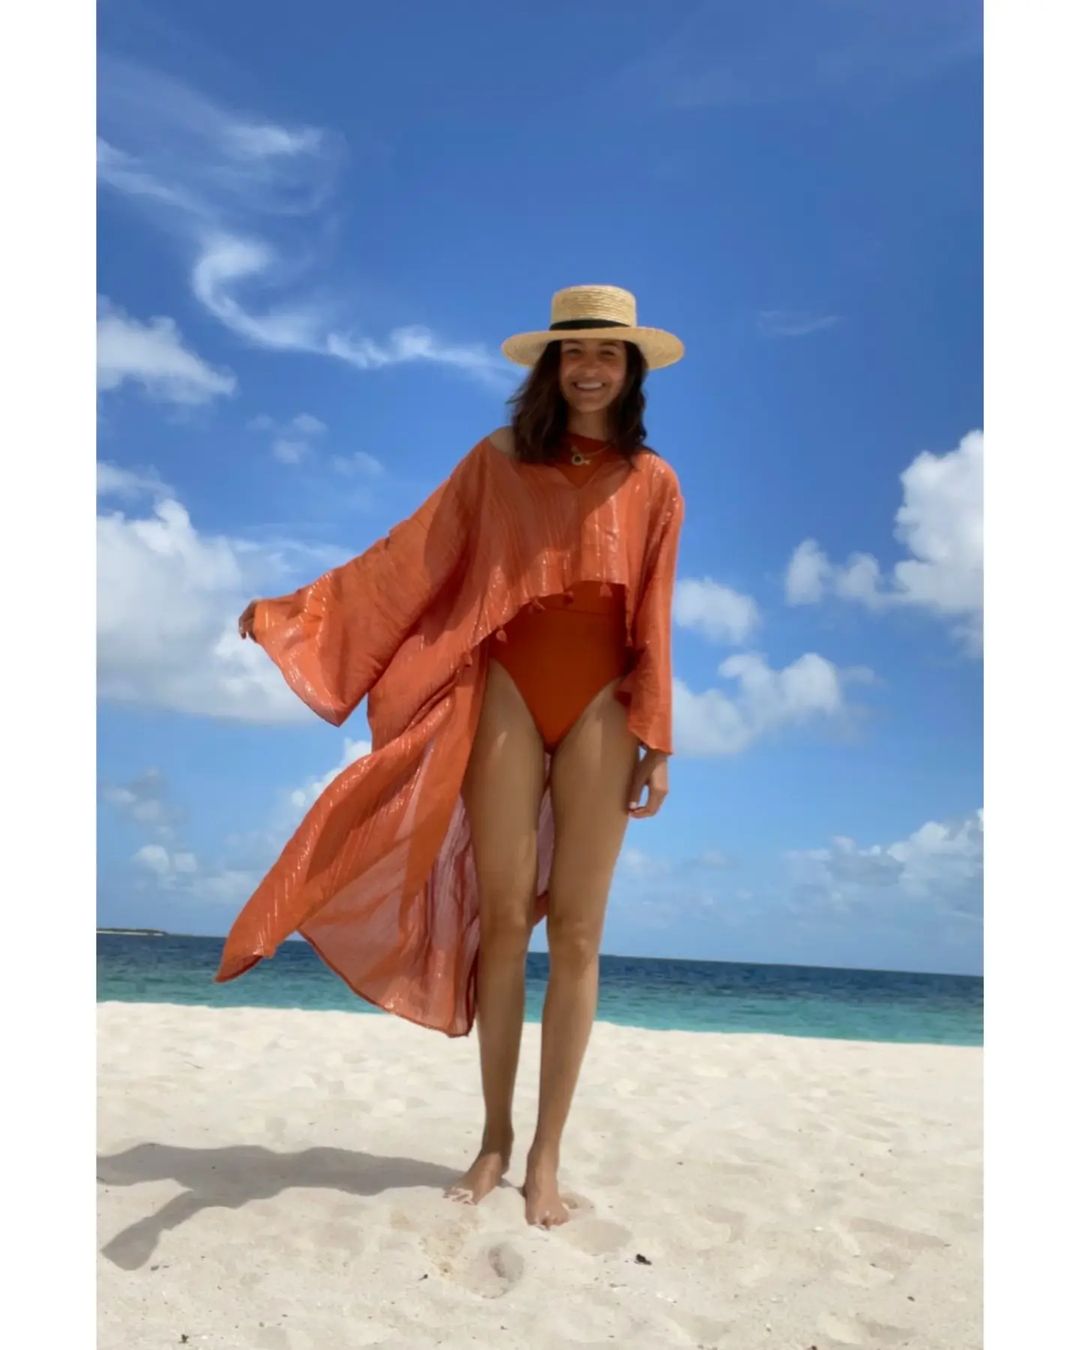 Anushka Sharma is oozing oomph in an orange monokini as she holidays in Maldives with her family.